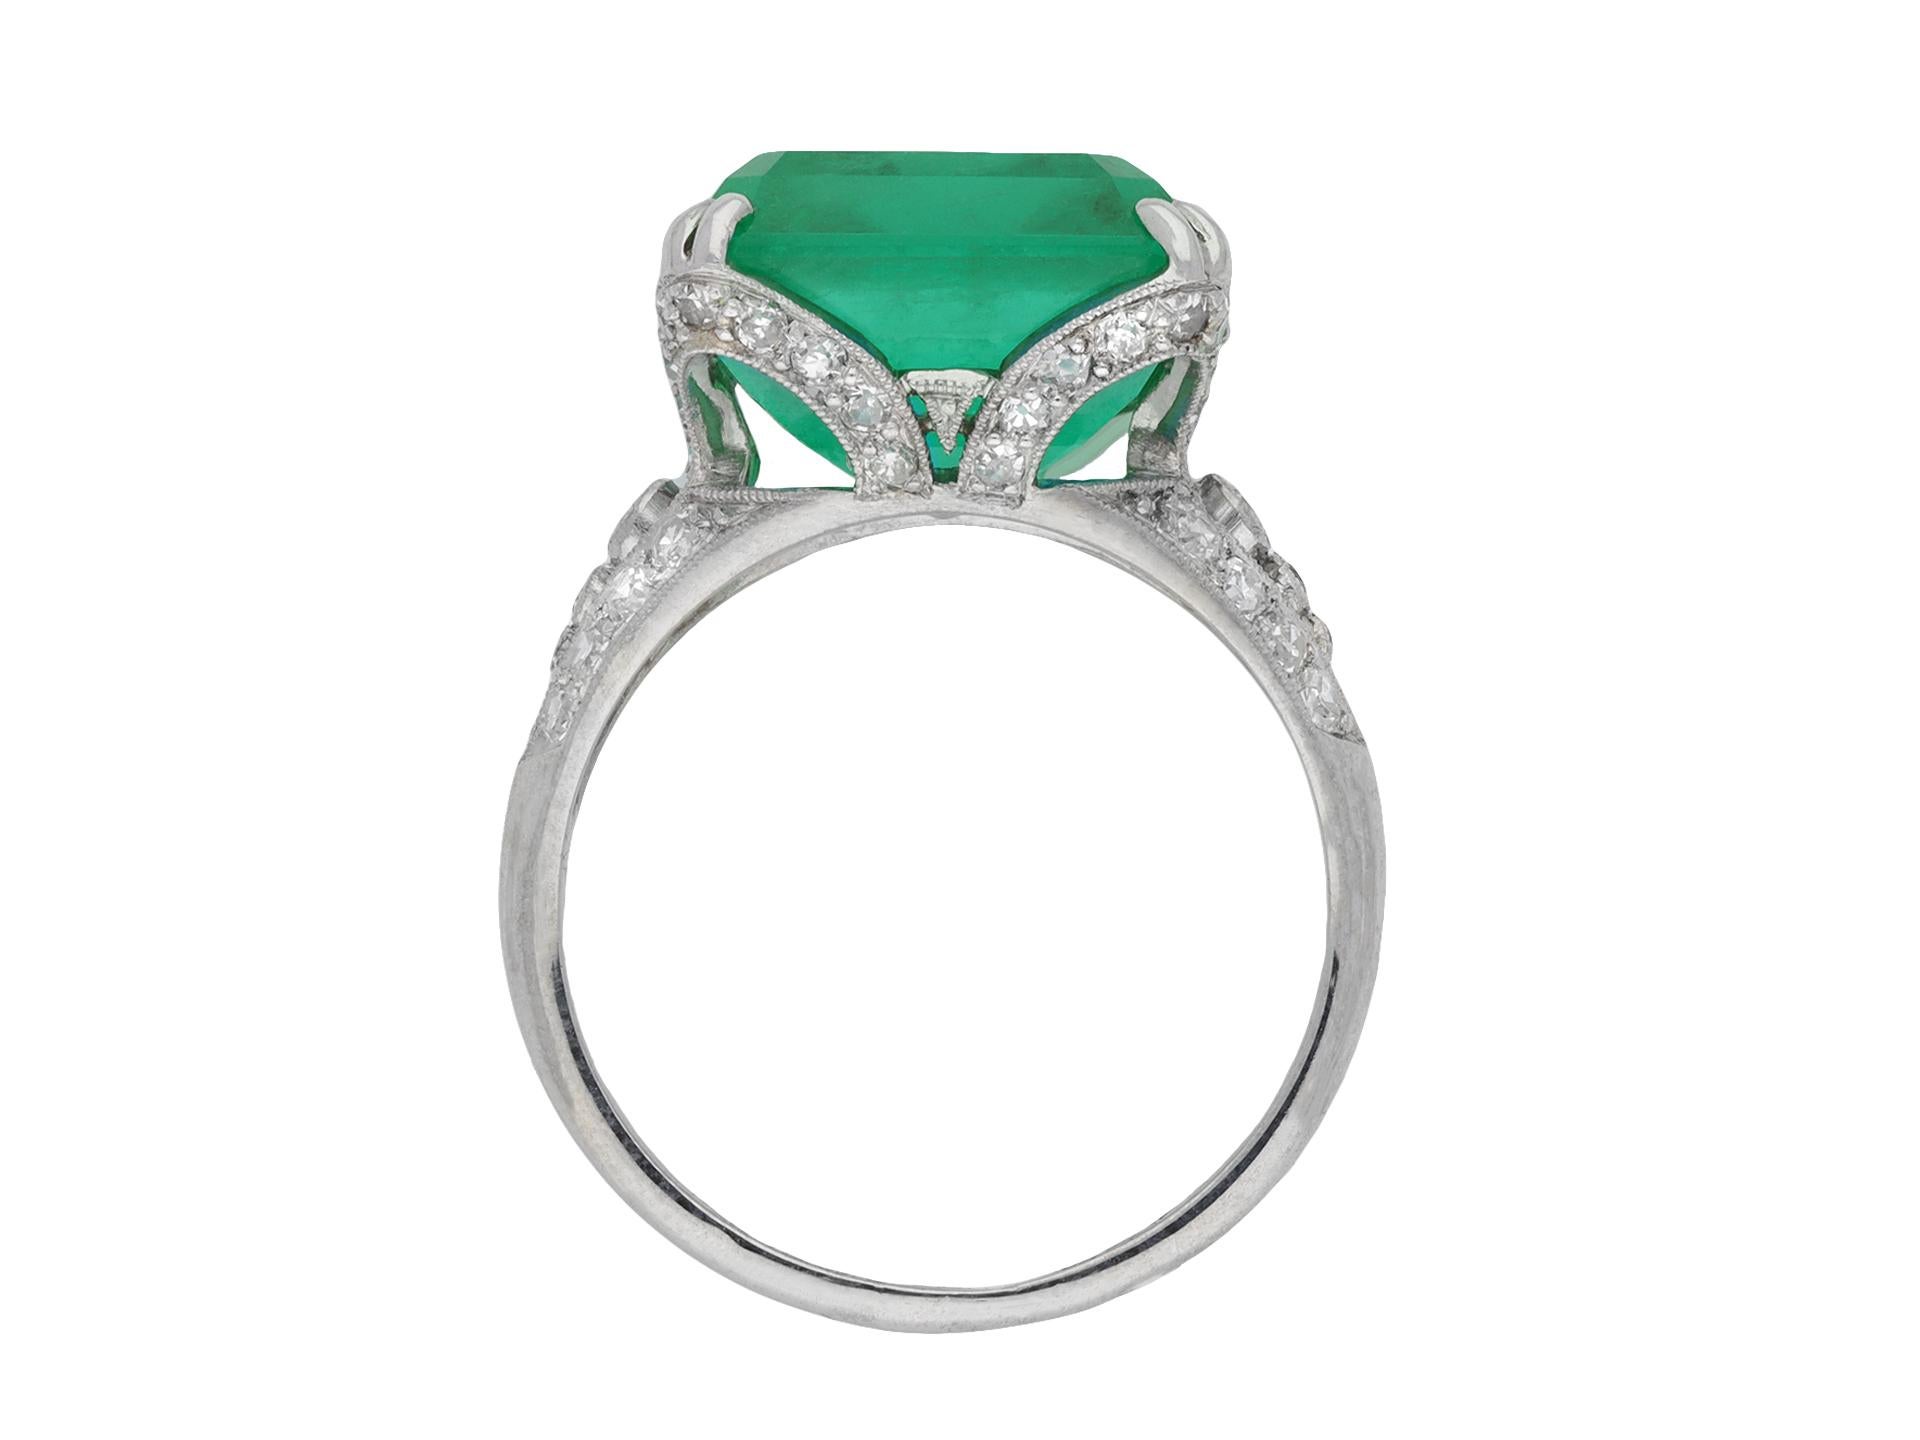 Emerald Cut Colombian Emerald and Diamond Ring, French, Circa 1915